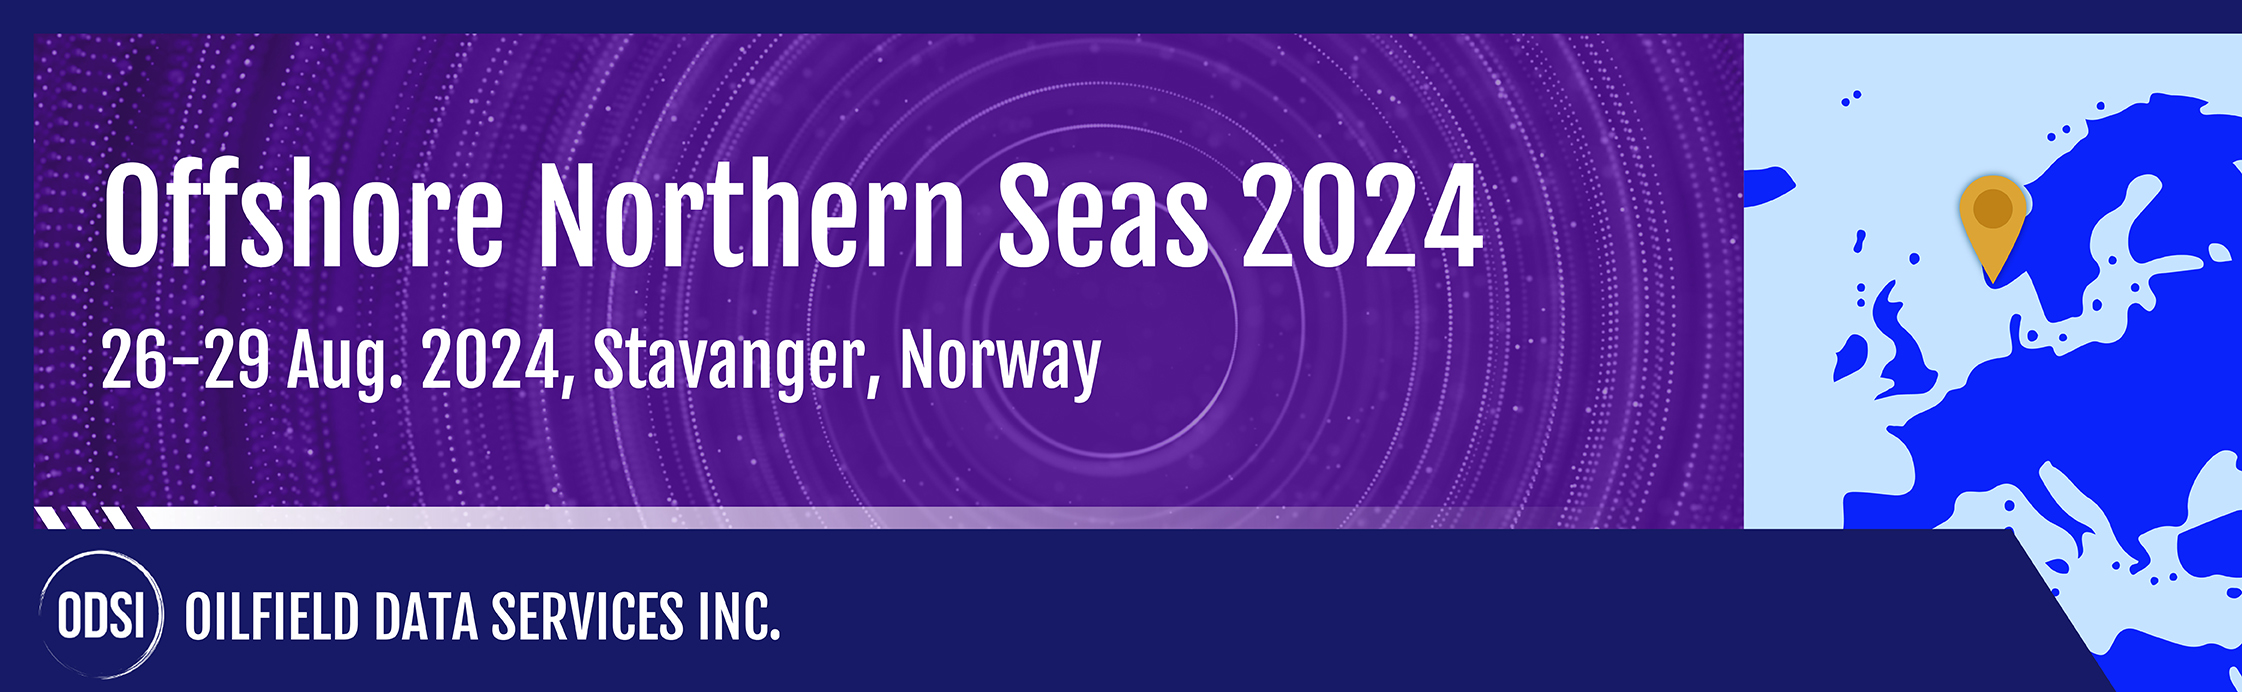 Offshore Northern Seas 2024